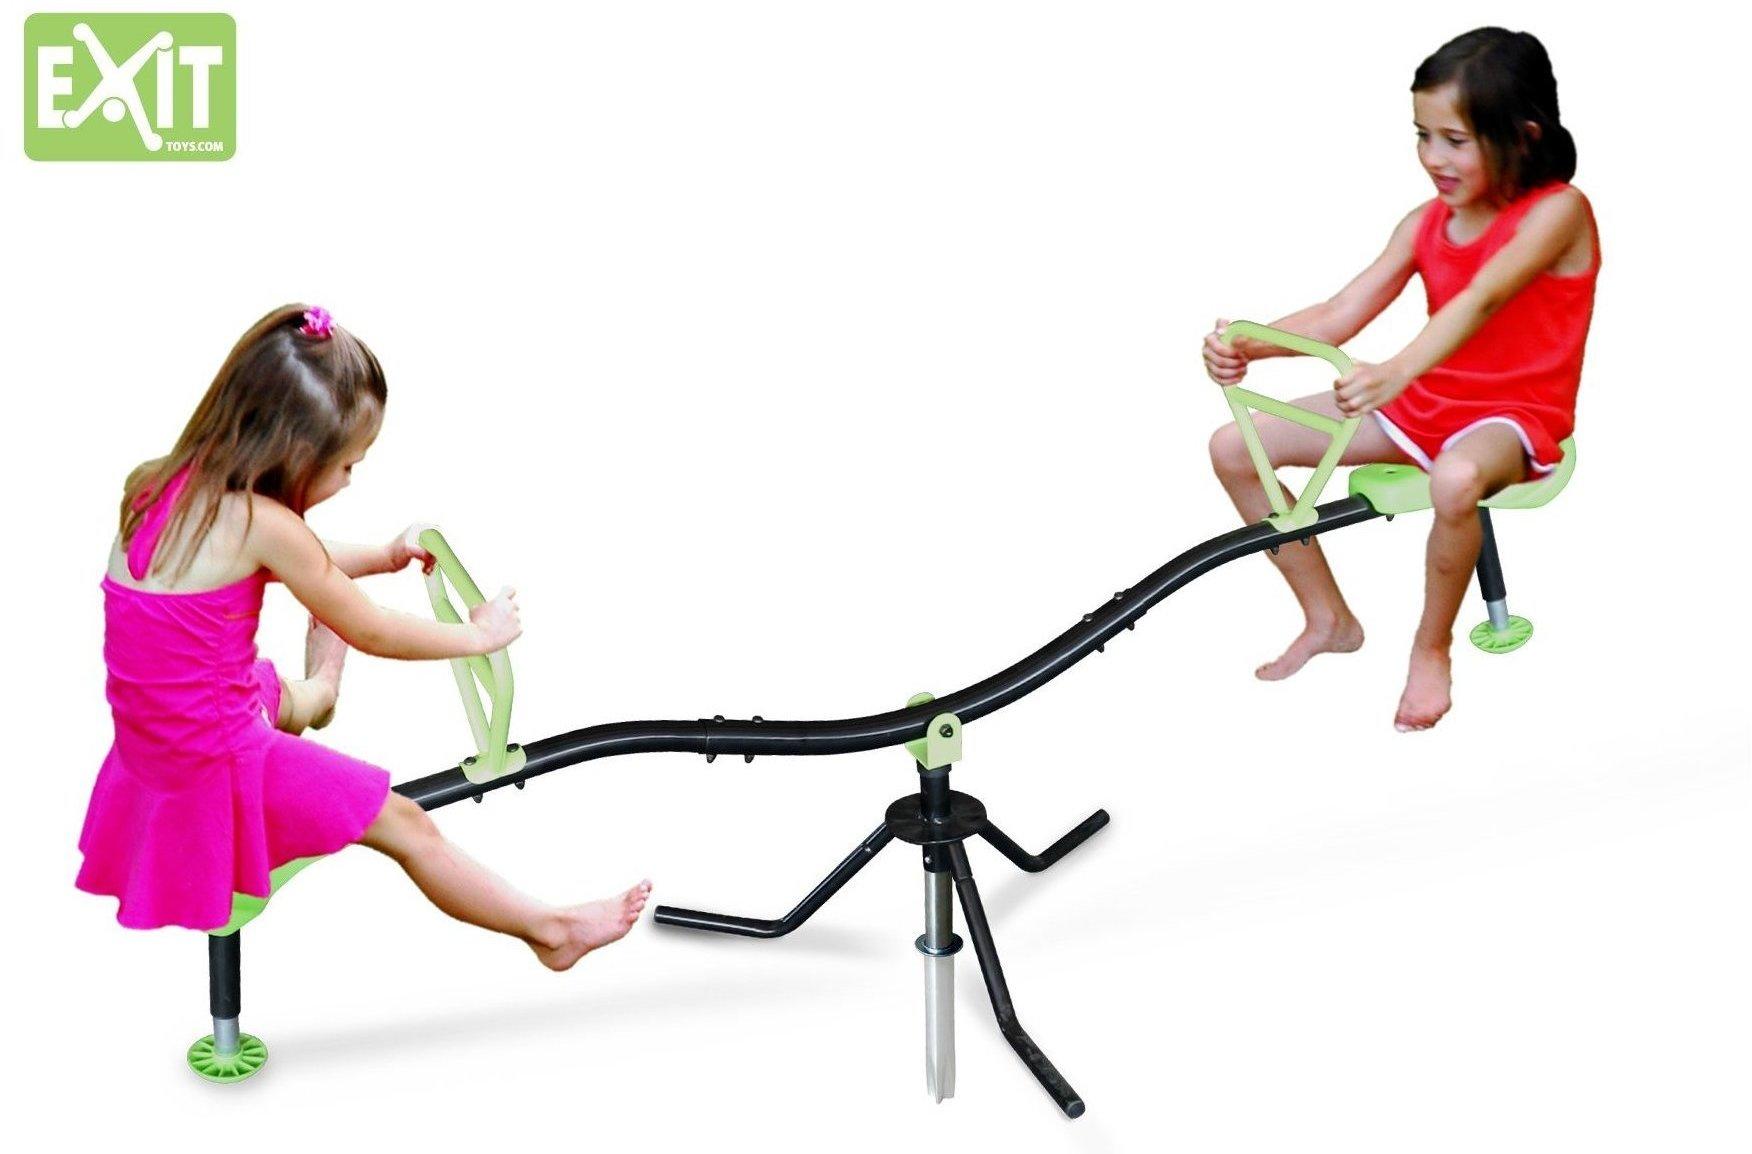 Exit Toys Karussell Wippe Test TOP Angebote ab 91,99 € (Februar 2023)